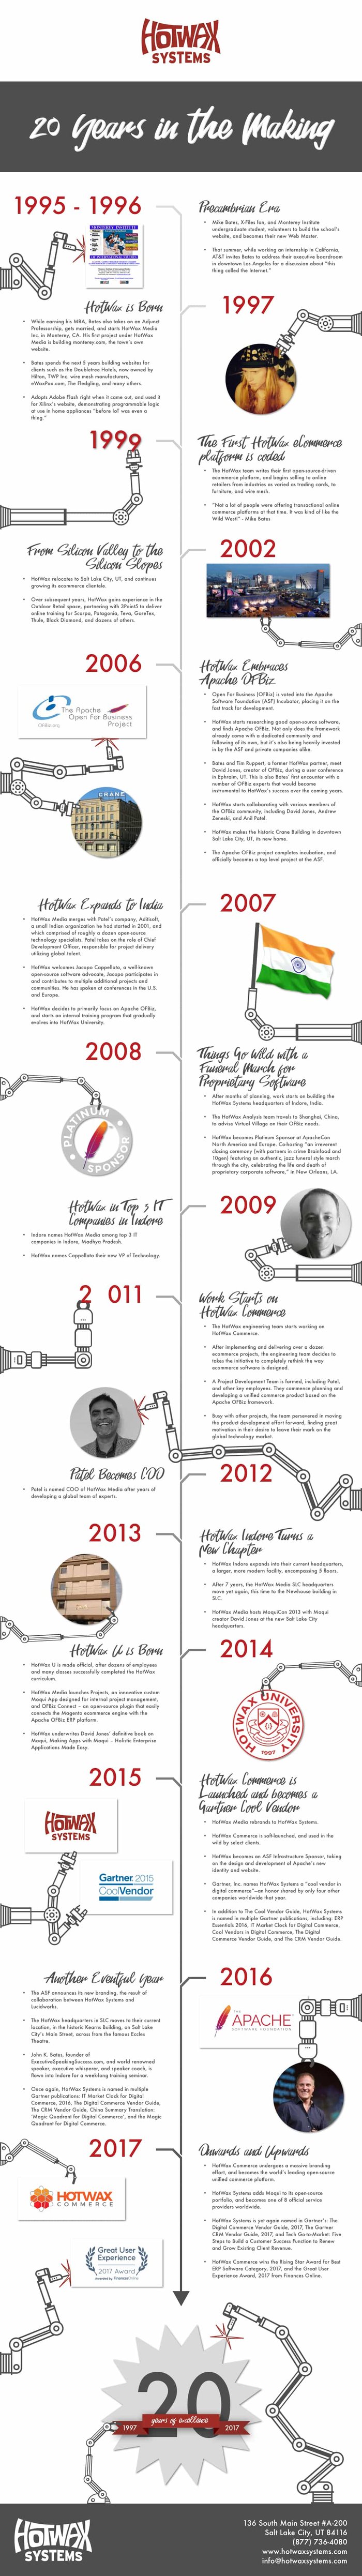 Infographic showing a twenty year history of HotWax Systems